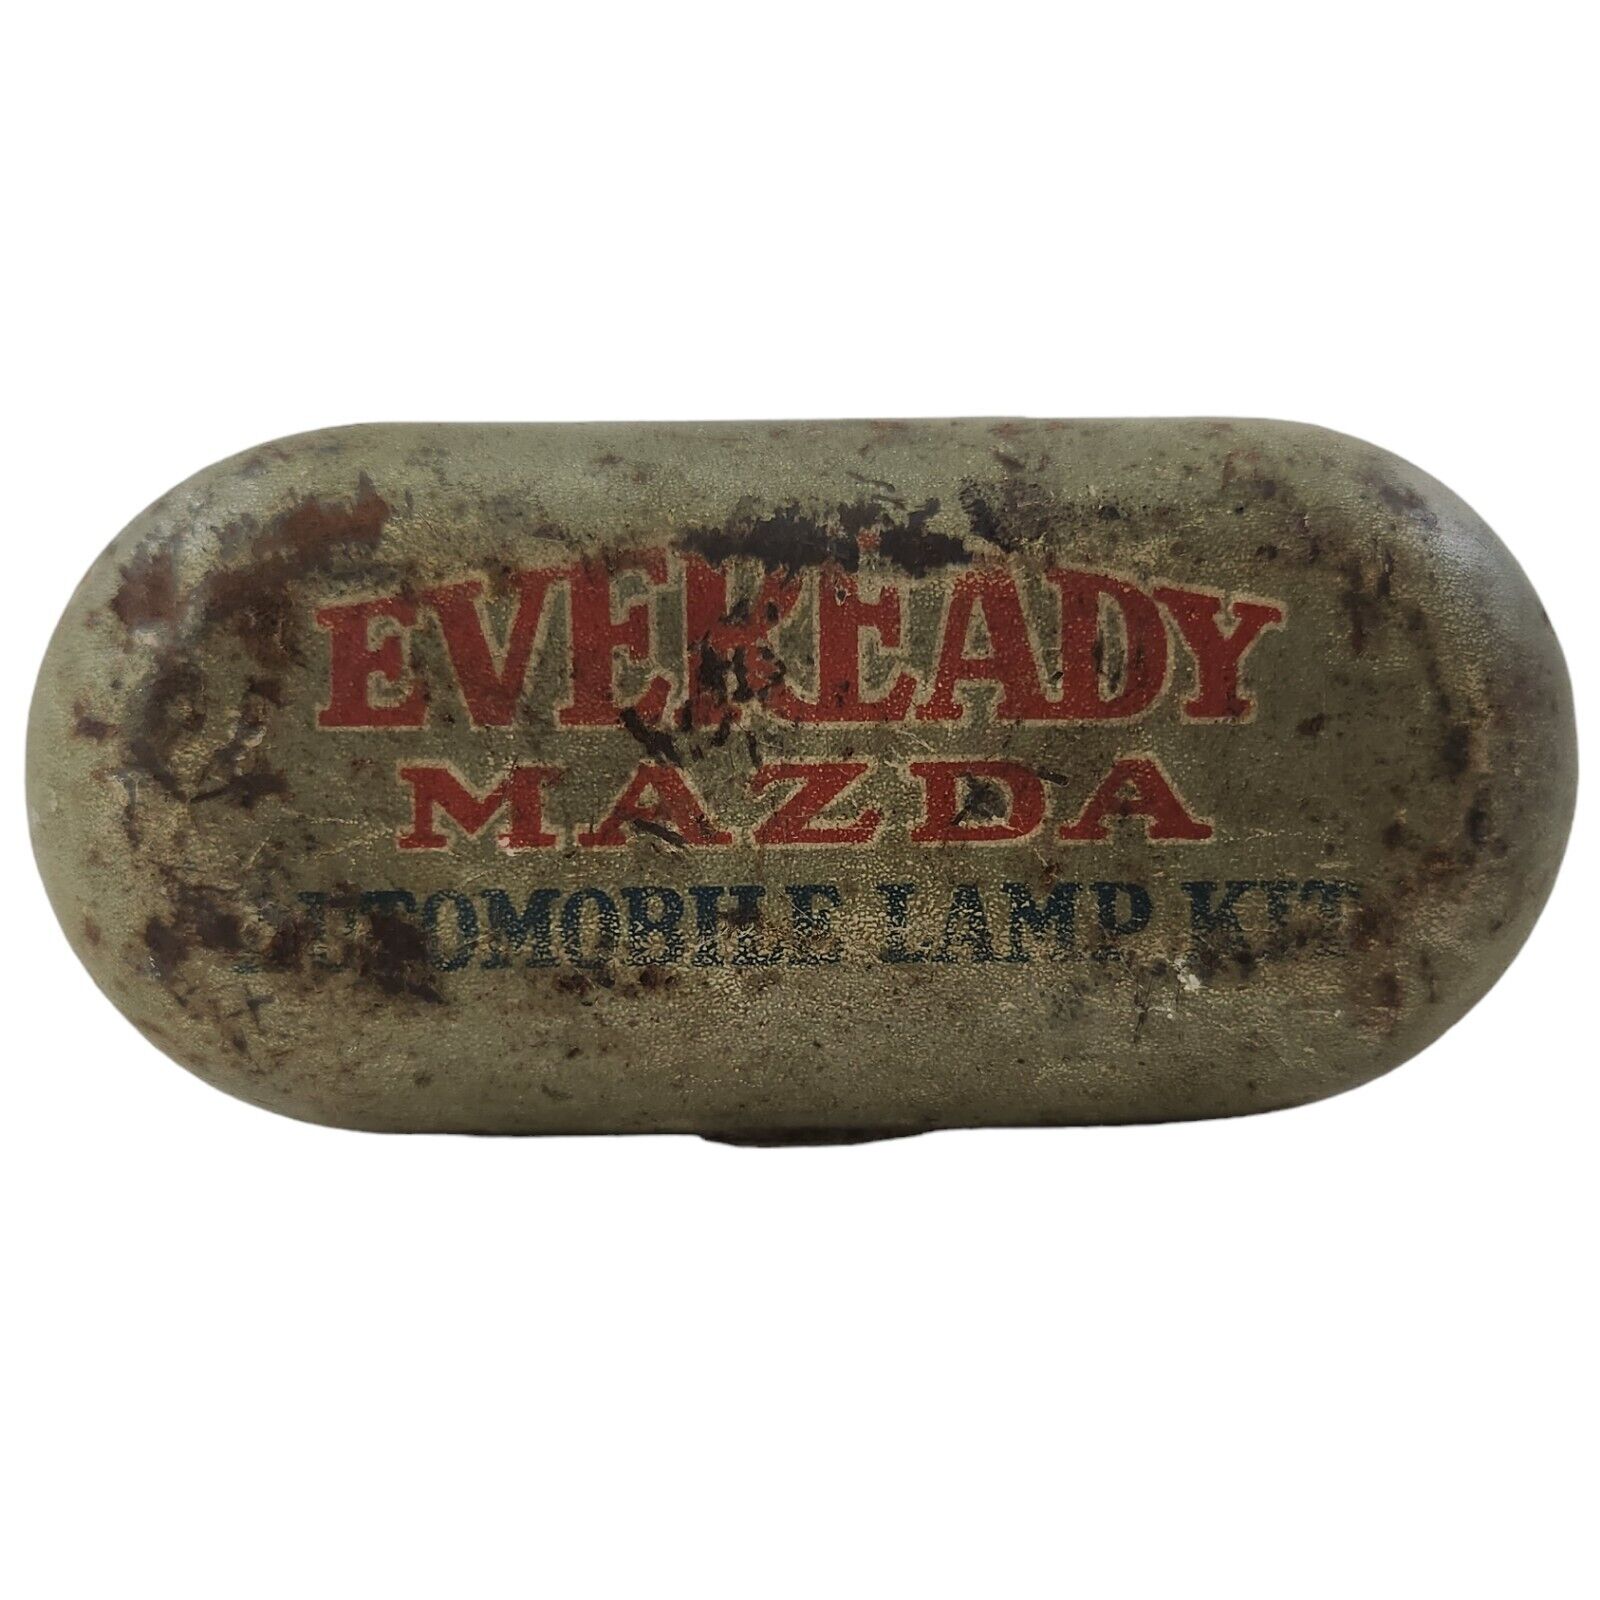 Vintage 1930's Eveready Mazda Automobile Lamp Kit Tin Canister Collectible 